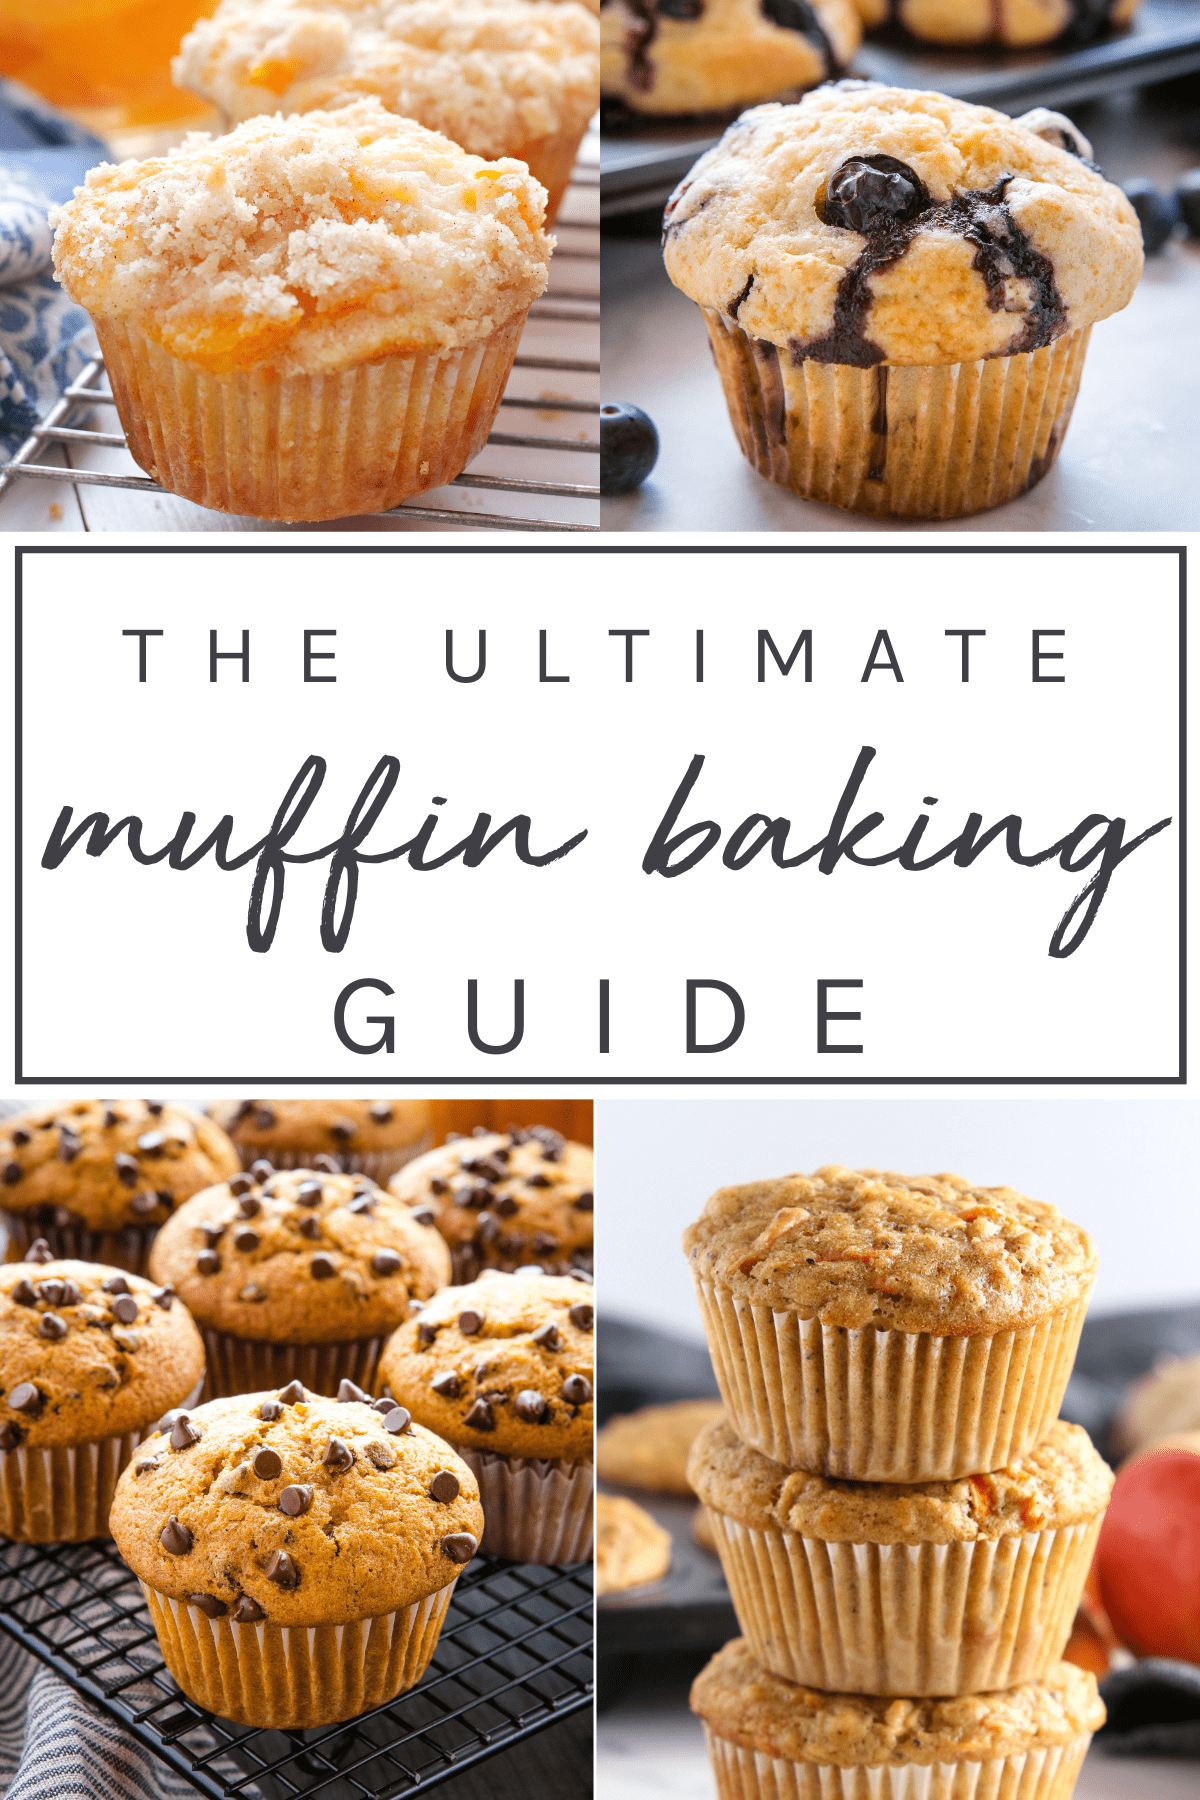 https://thebusybaker.ca/wp-content/uploads/2023/02/ultimate-muffin-baking-guide-3-1.png